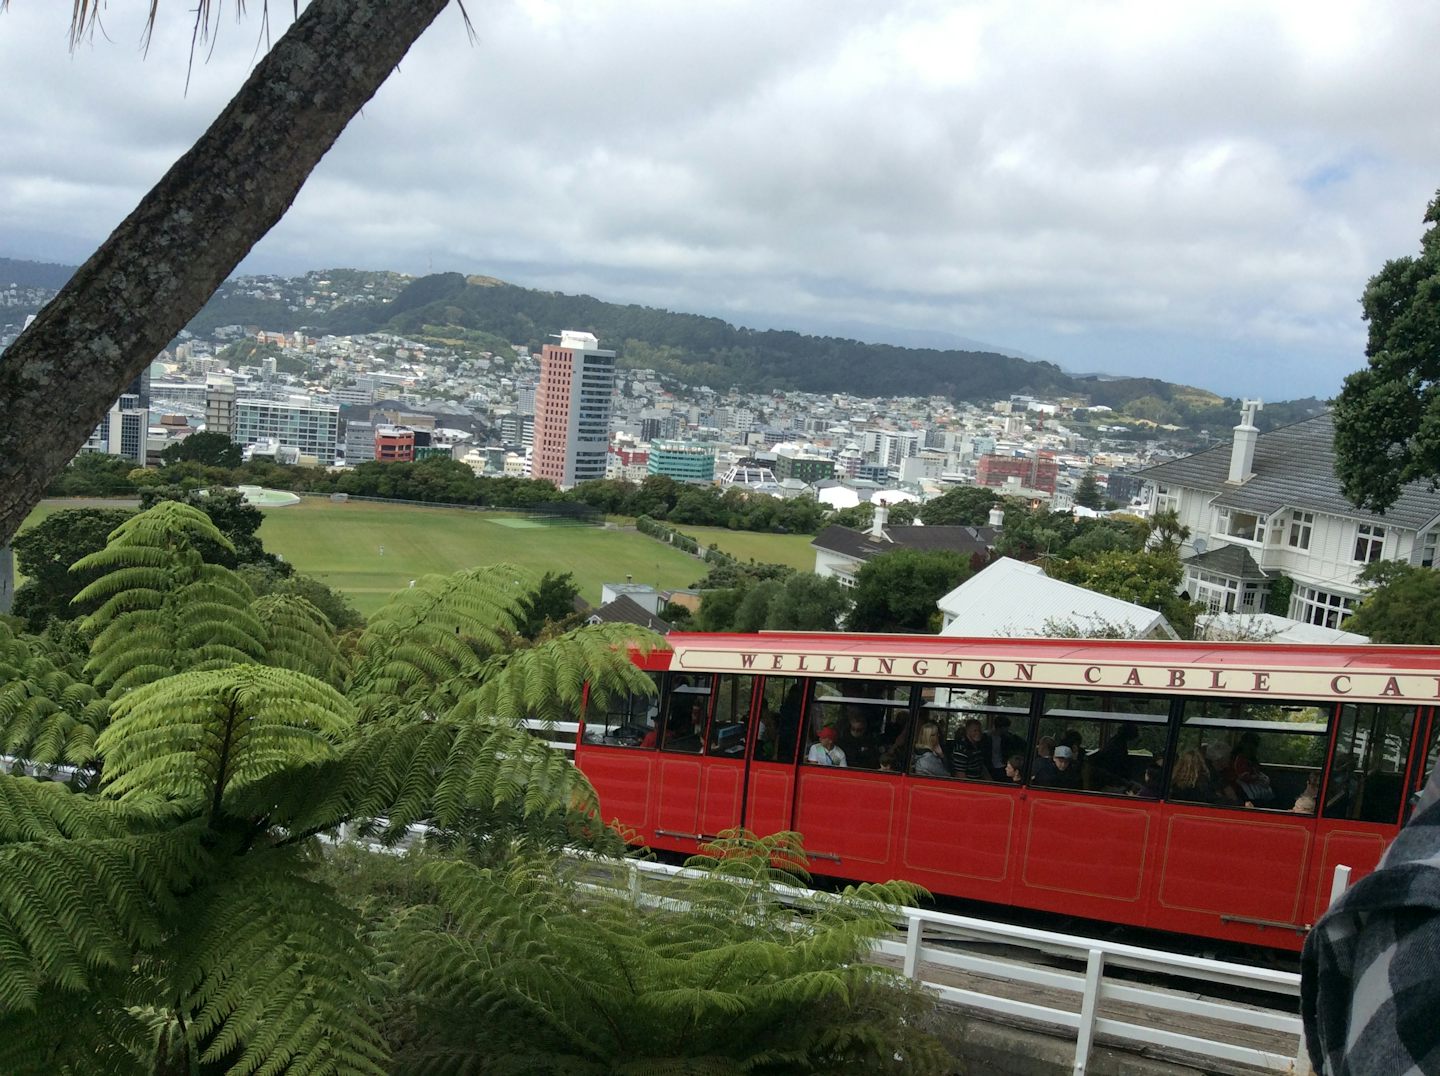 This is the cable car we rode in Wellington.